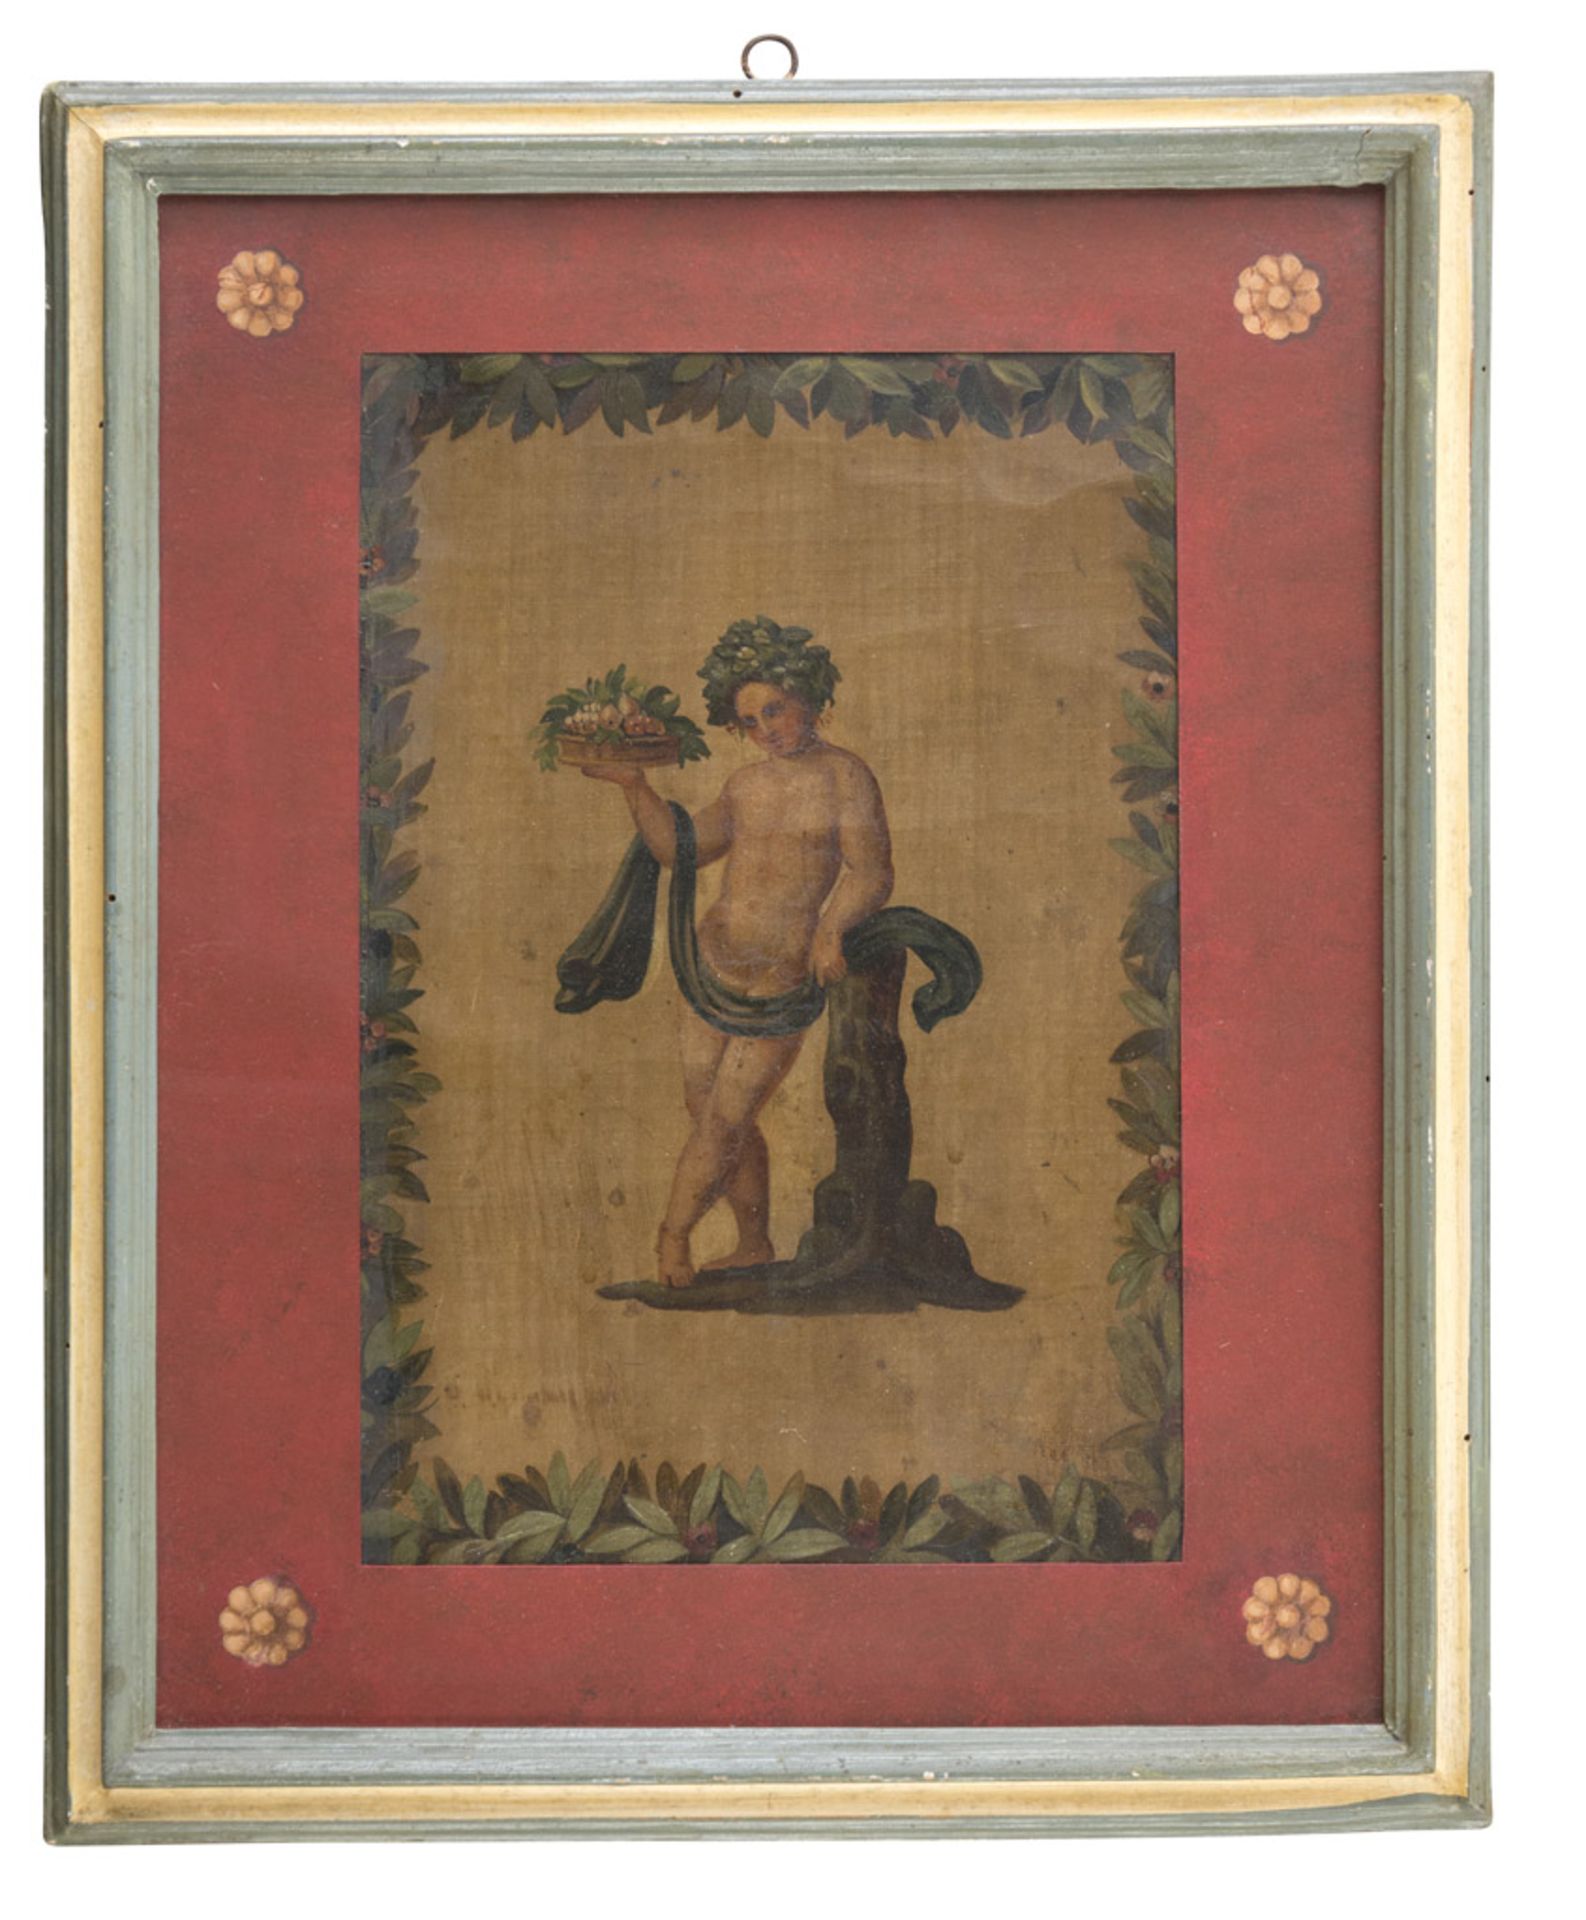 ITALIAN PAINTER, 19TH CENTURY DIONYSUS APOLLO PSYCHE PSYCHE Four oil paintings on canvas, cm. 32 x